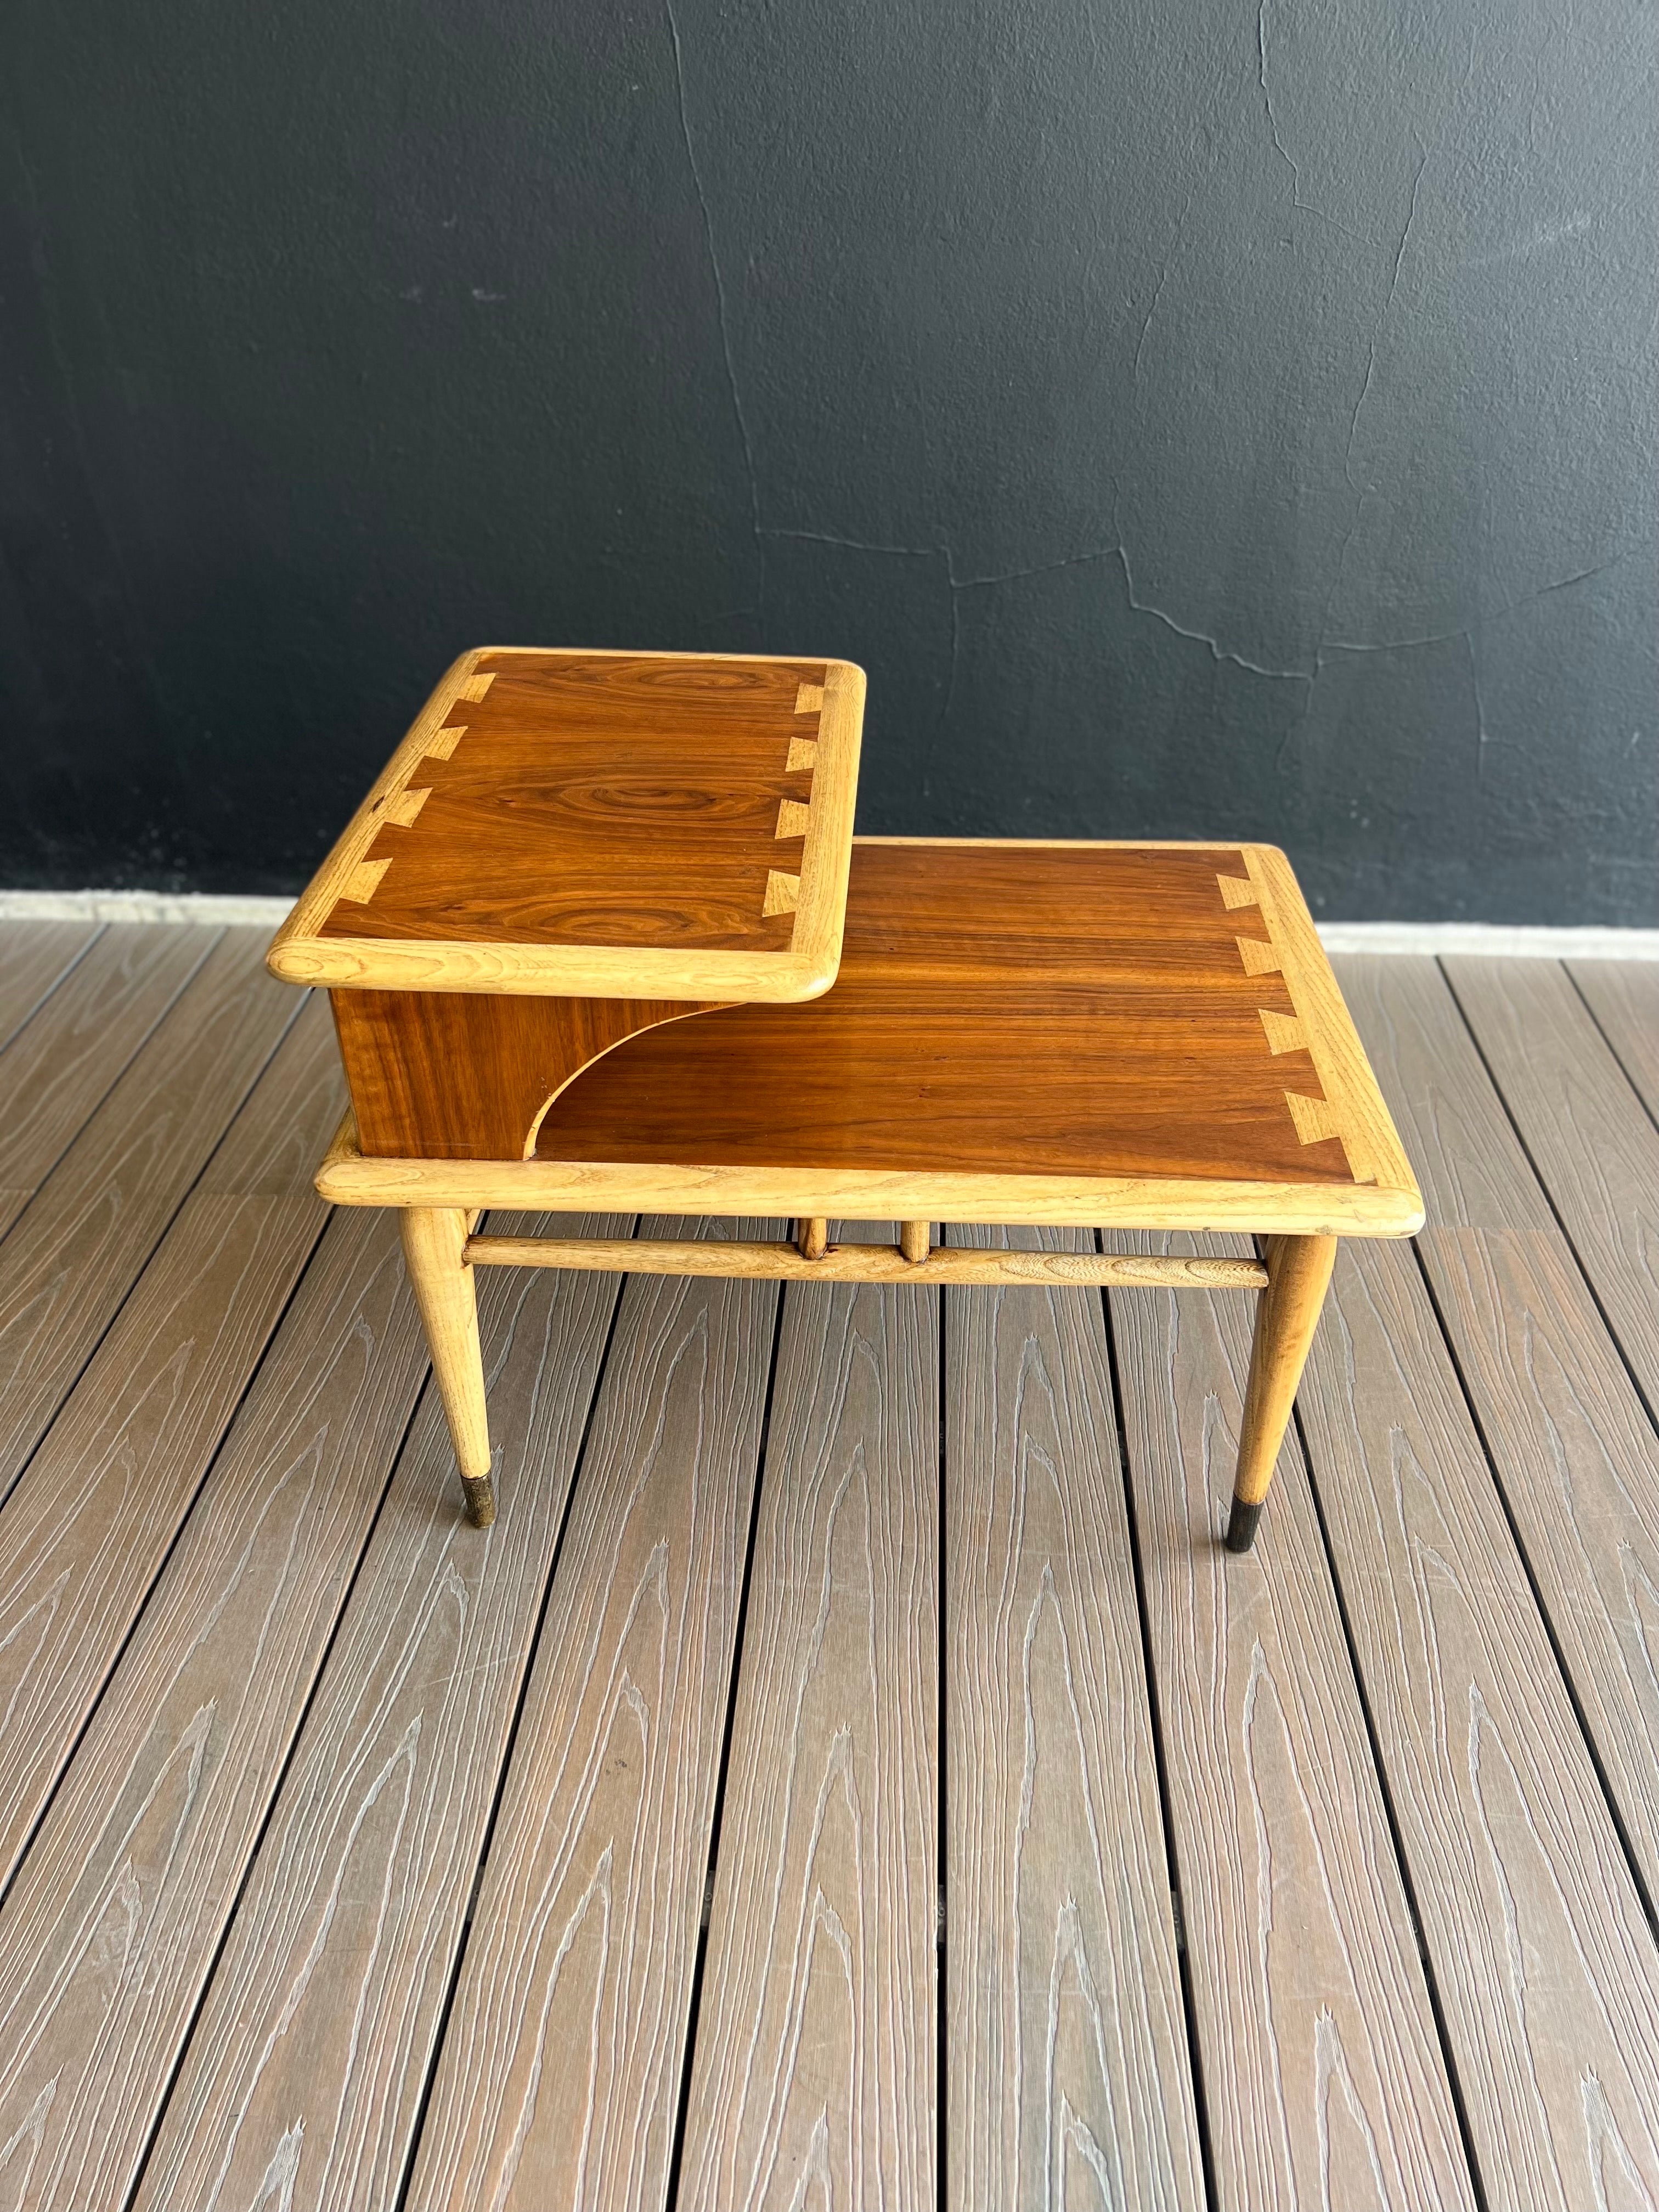 Classic mid-century modern Lane Acclaim walnut and oak dovetail end table, professionally restored by our master craftsmen in our workshop, it has minimal details that time marked but that give that character and essence to our vintage pieces.
We